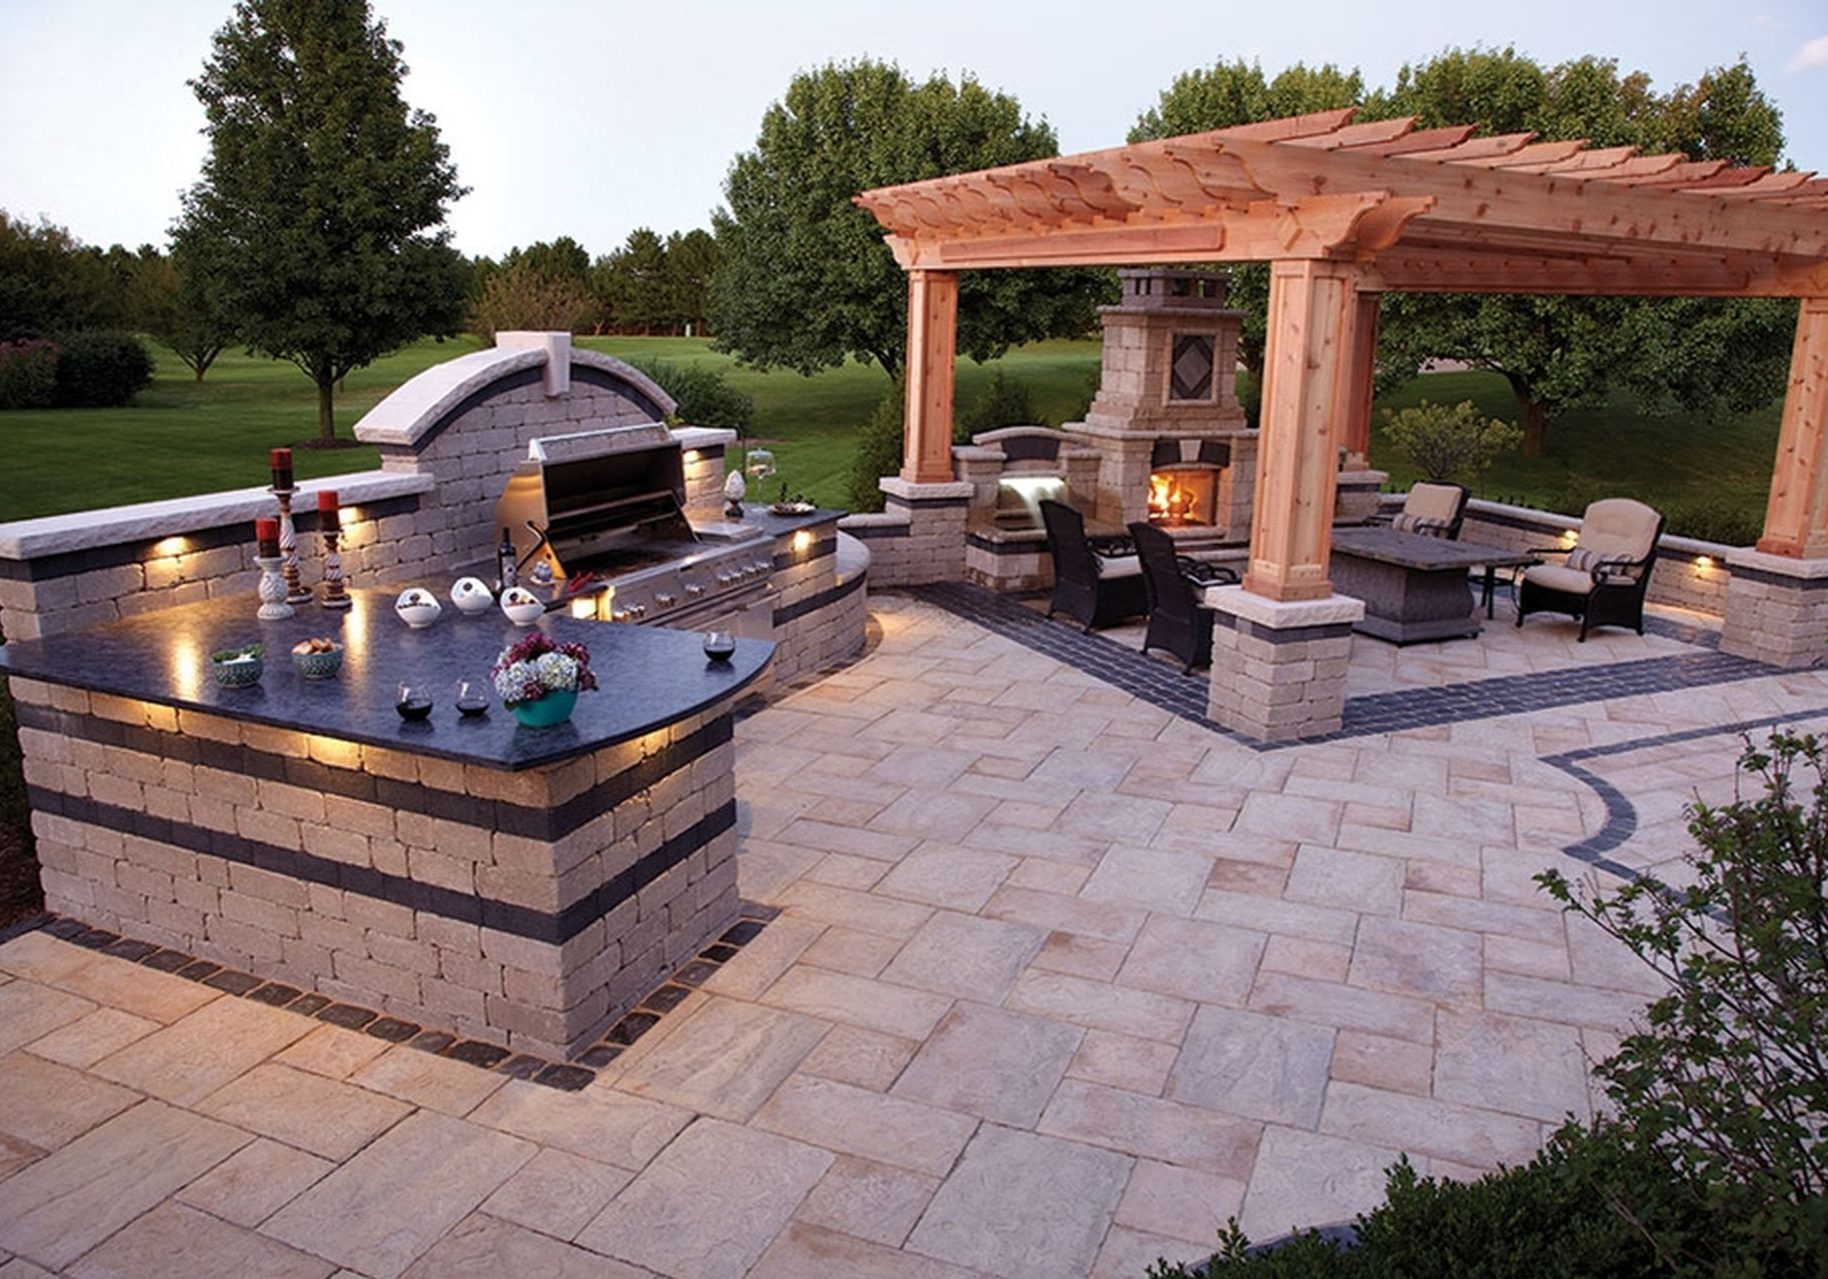 A patio with an outdoor kitchen and fireplace.